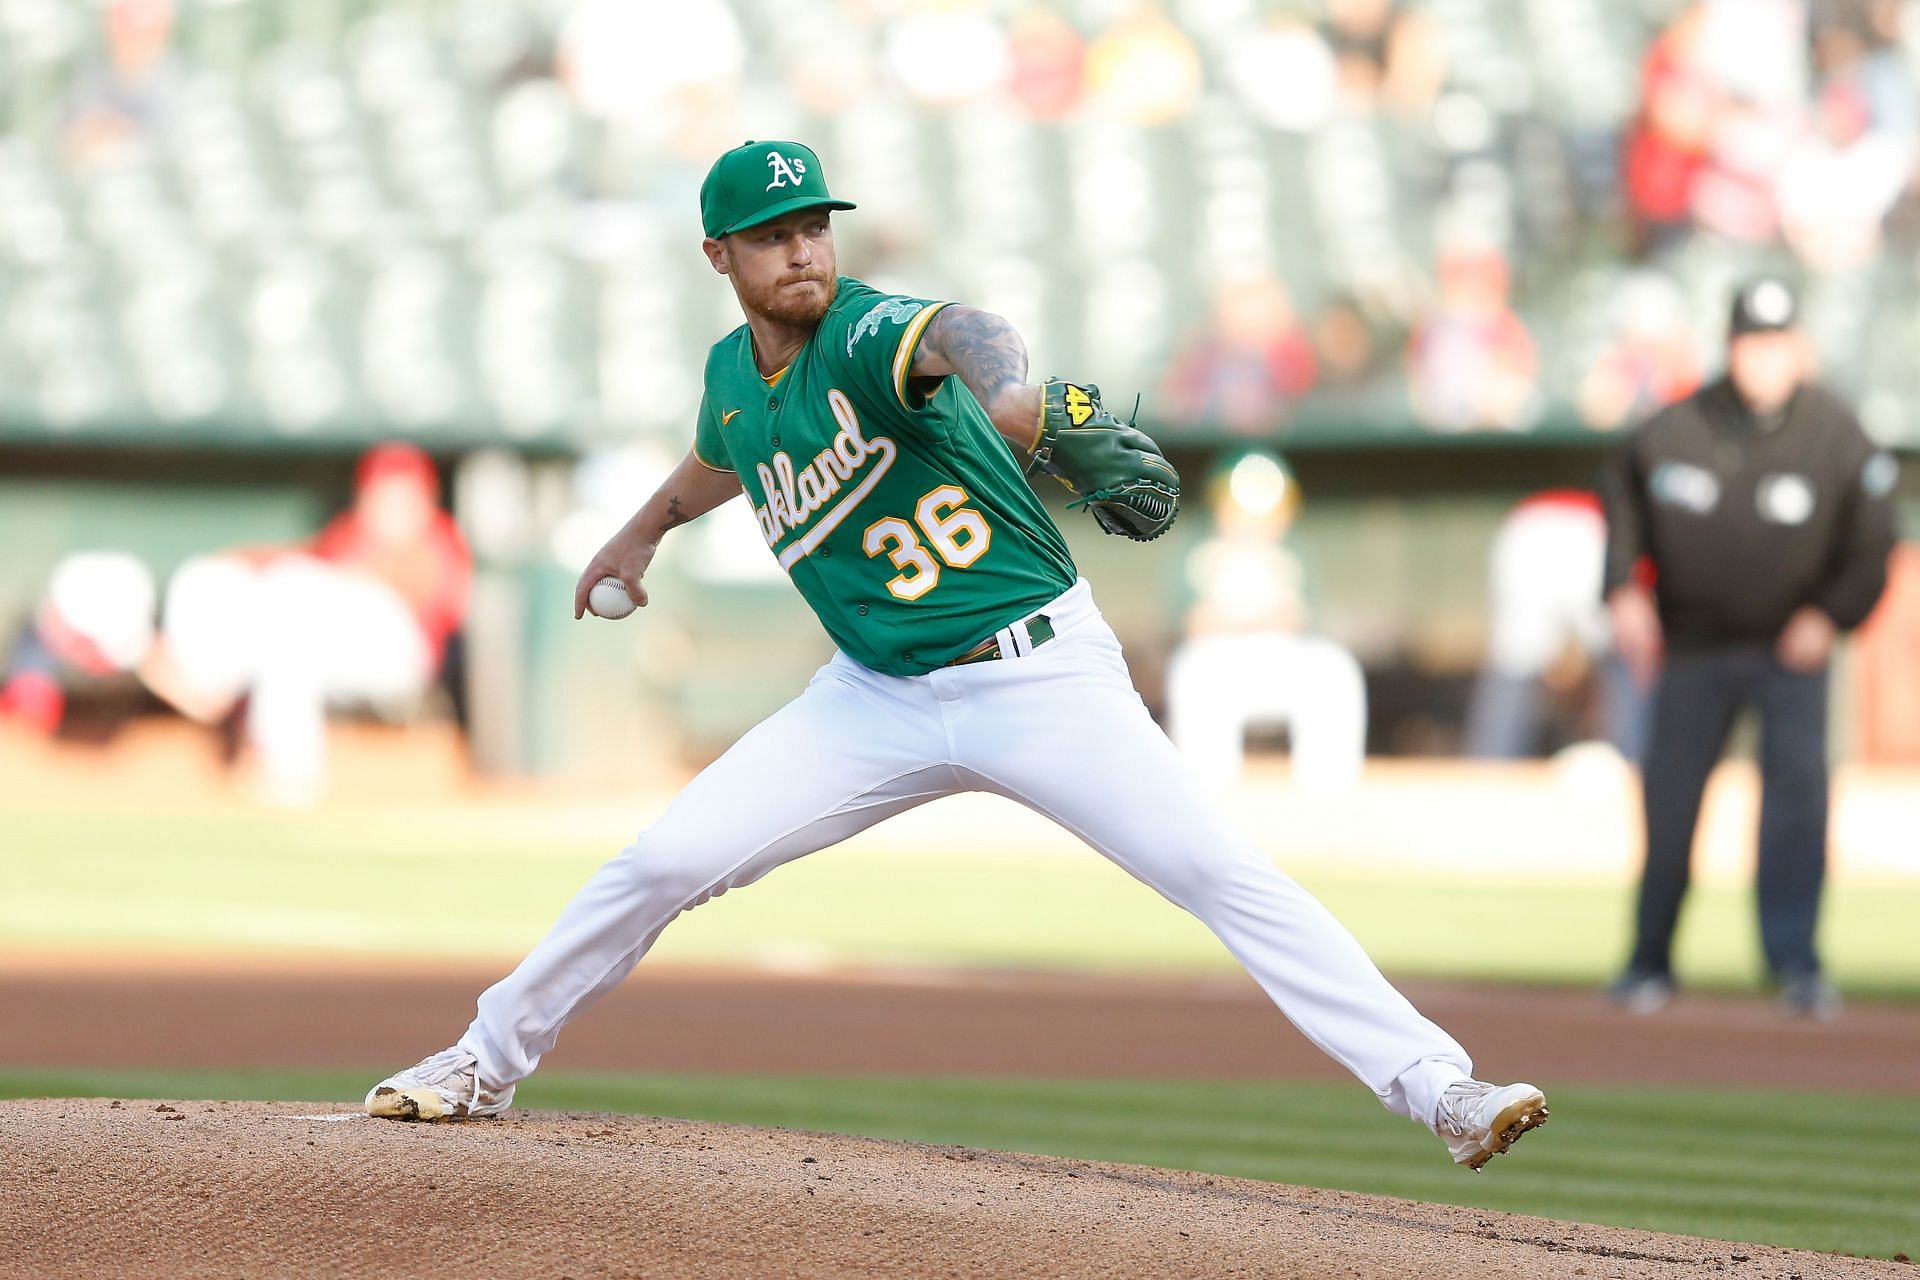 Los Angeles Angels v Oakland Athletics - Game Two